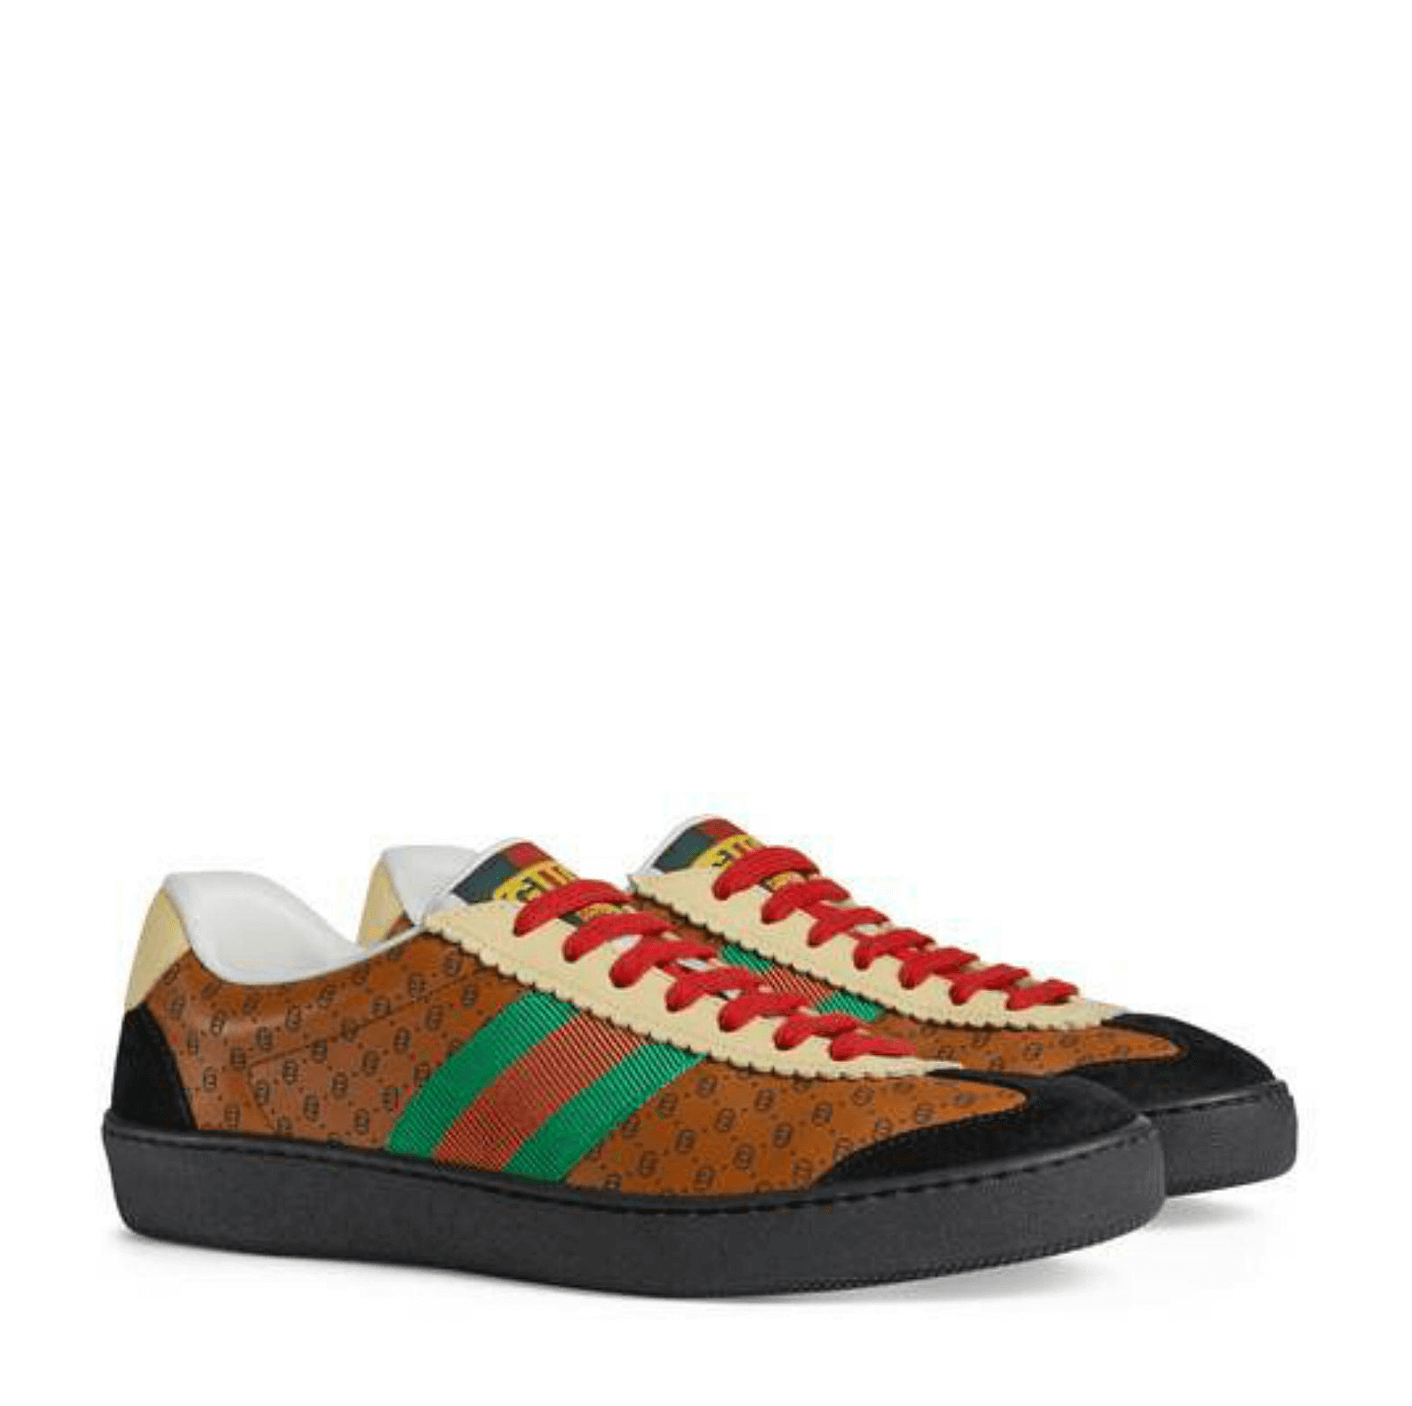 Gucci-Dapper Dan: a special collaboration between the House and